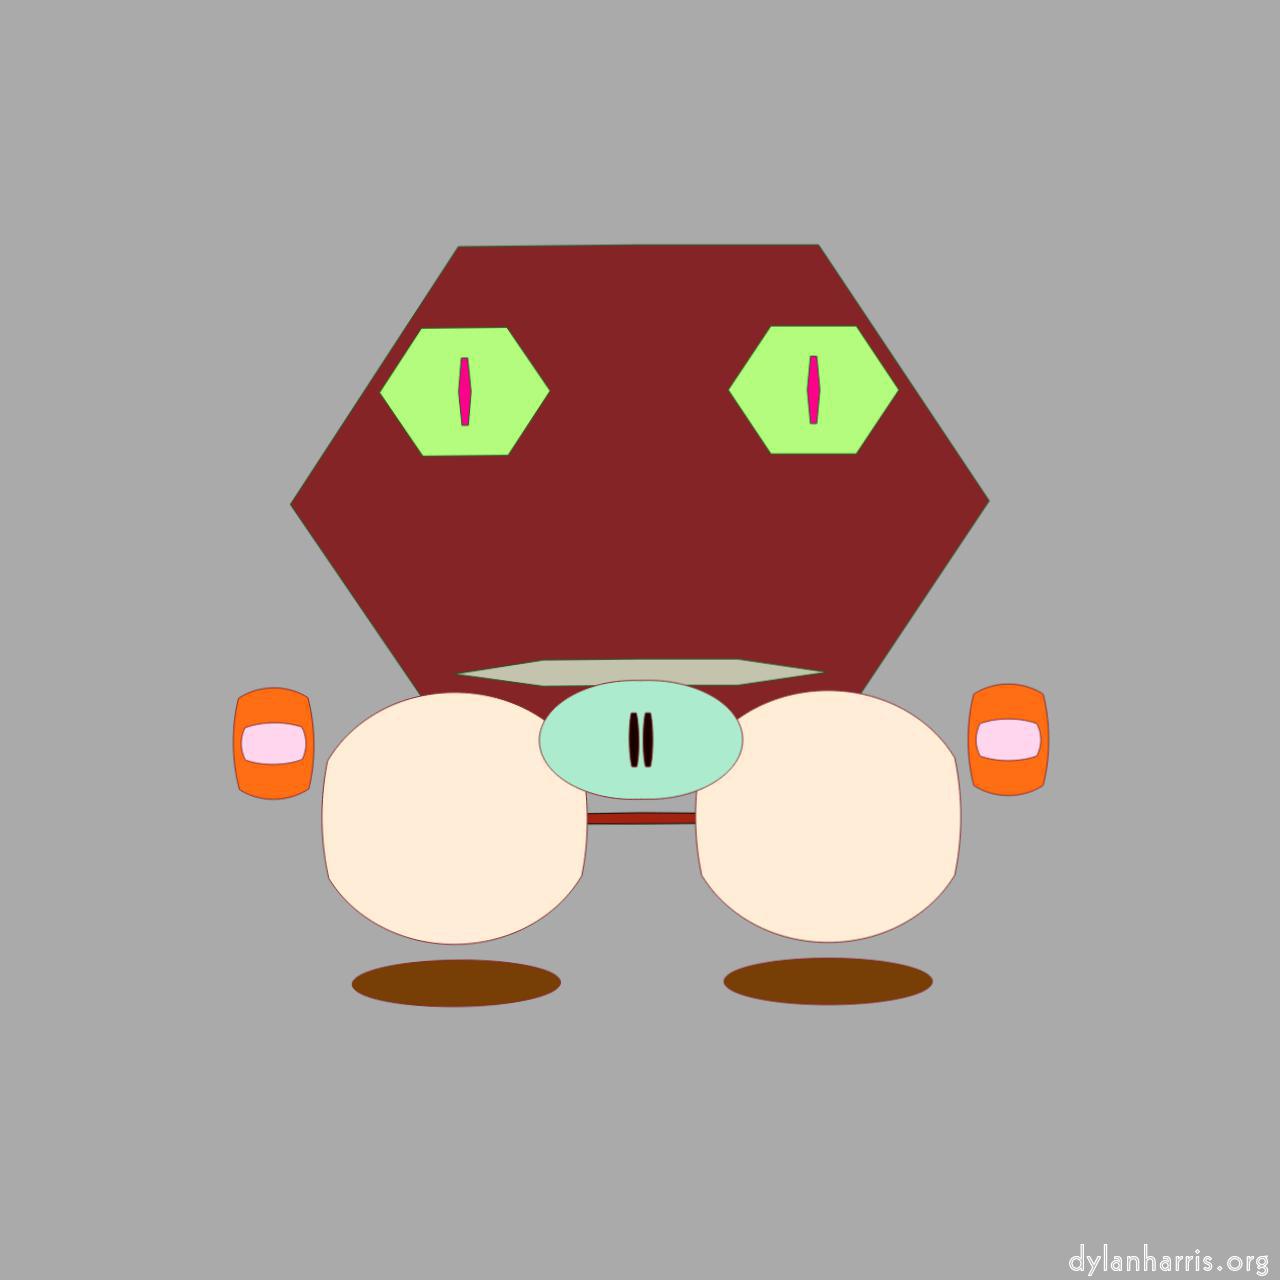 image: cartoon characters and shapes :: froggy